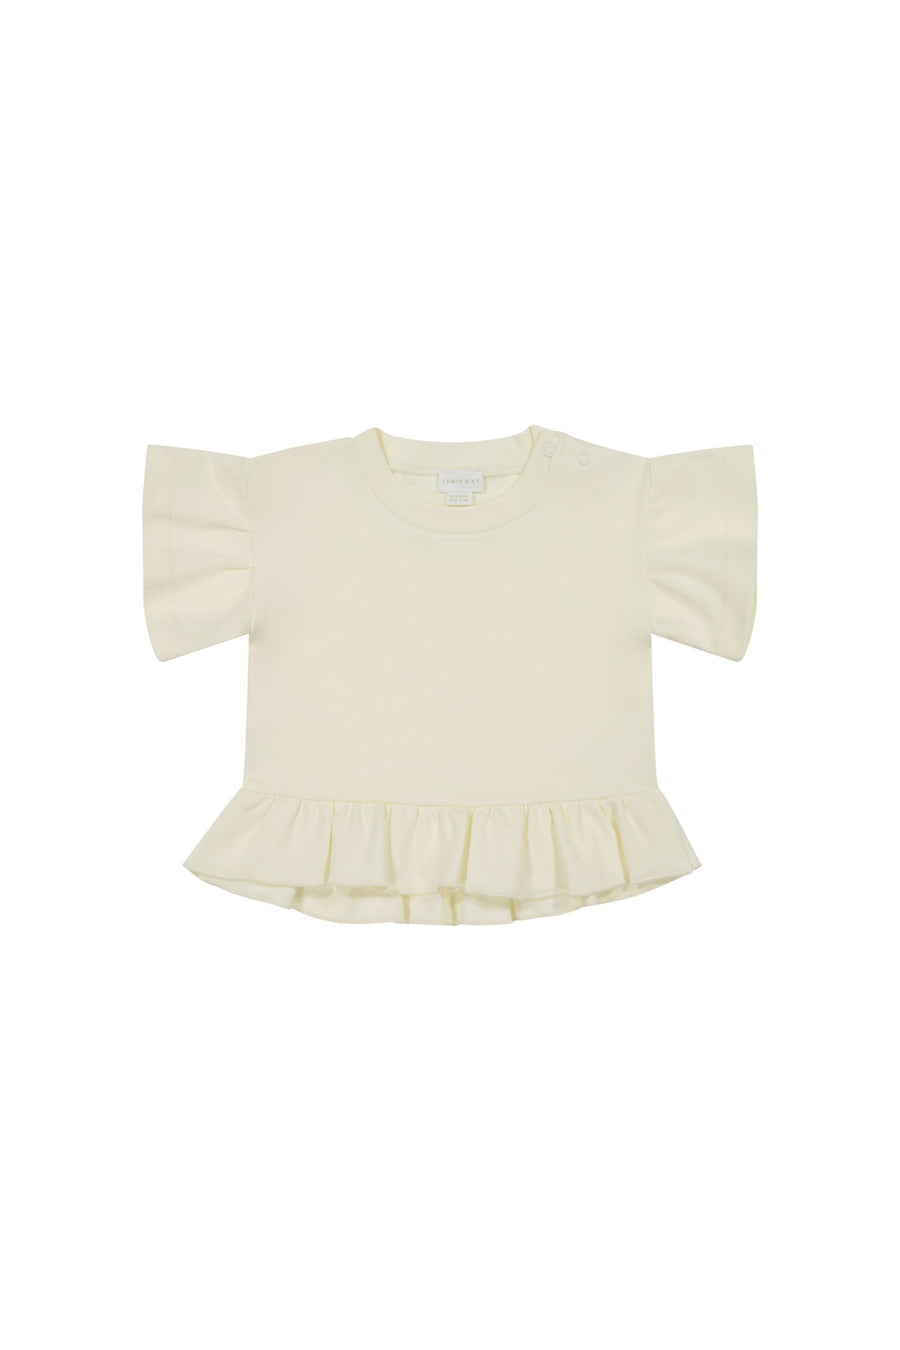 Pima Cotton Courtney Ruffle Top - Egret Childrens Top from Jamie Kay USA